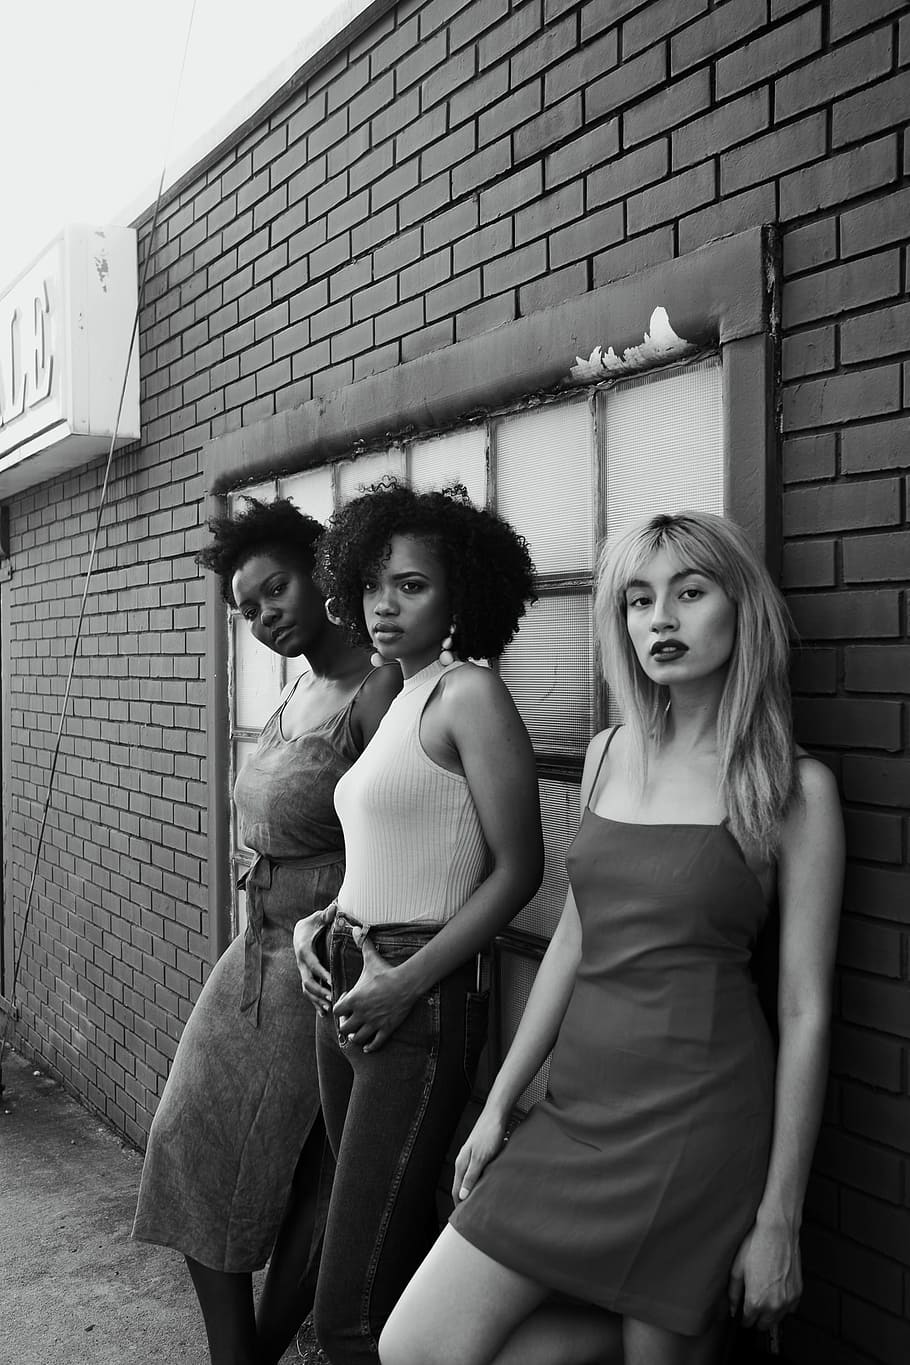 greyscale photo of three women leaning on wall, grayscale photo of three standing woman with brick wall behind them, HD wallpaper